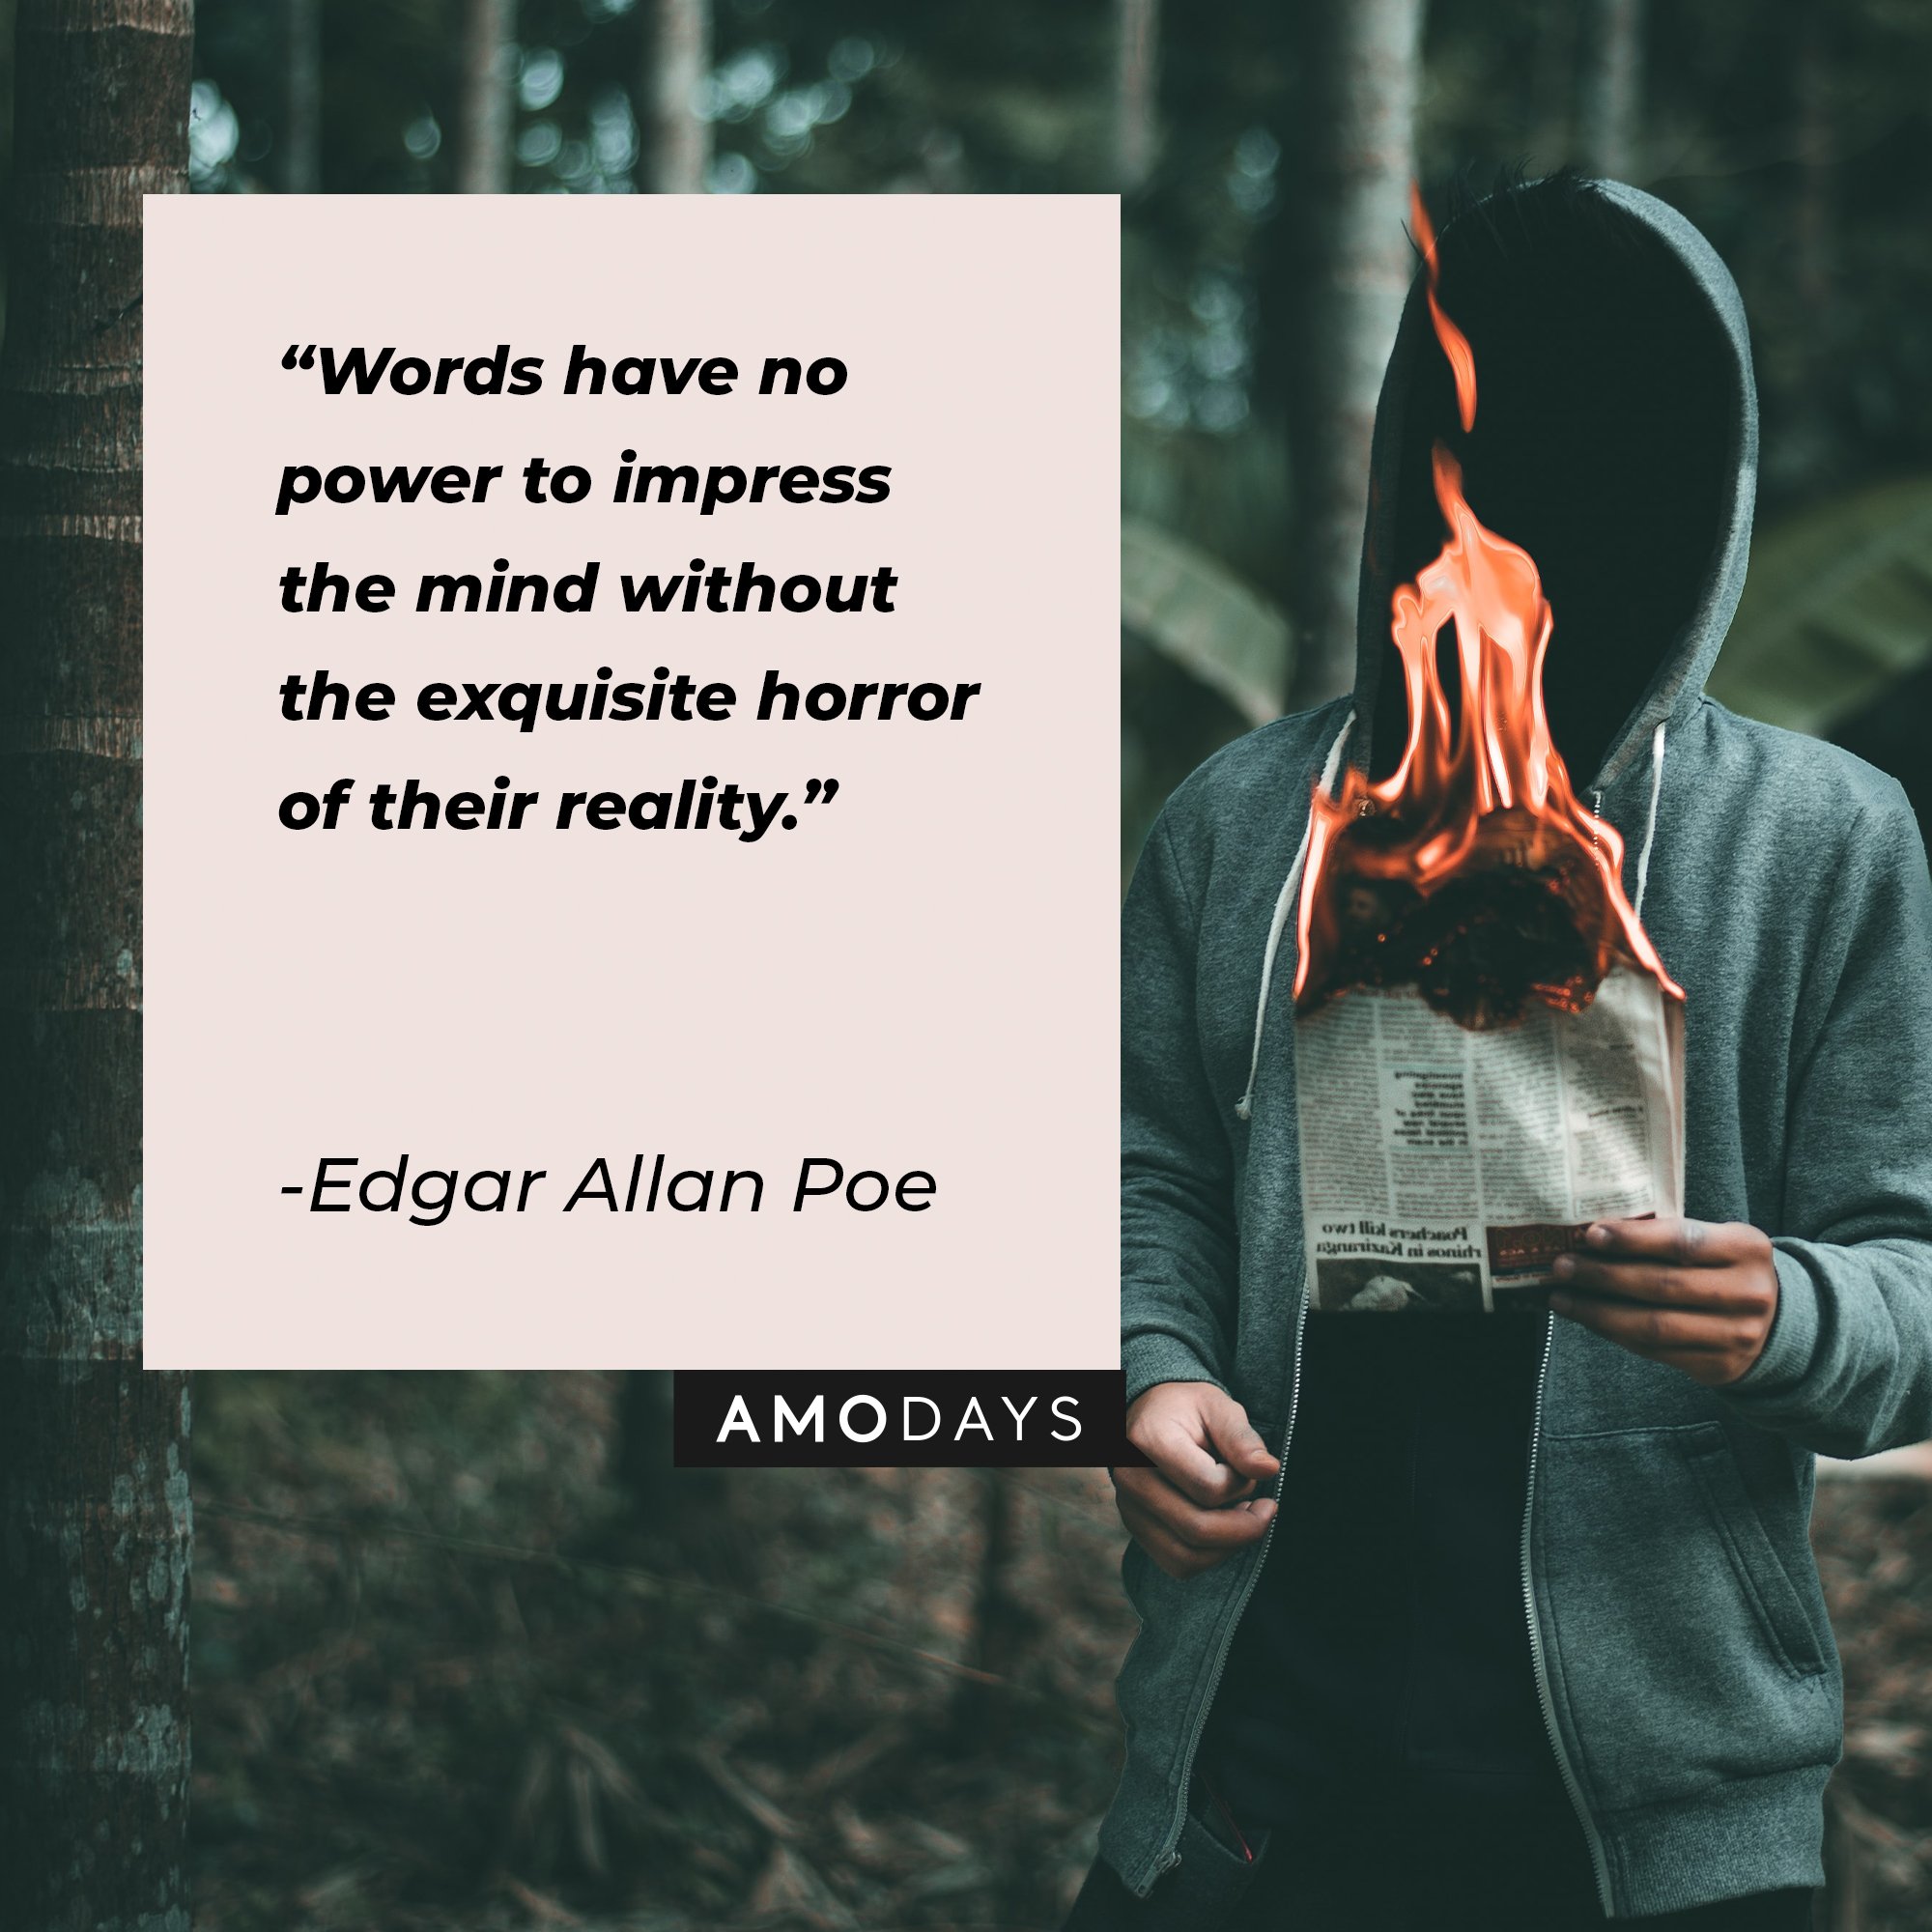 Edgar Allan Poe’s quote: "Words have no power to impress the mind without the exquisite horror of their reality." | Image: AmoDays